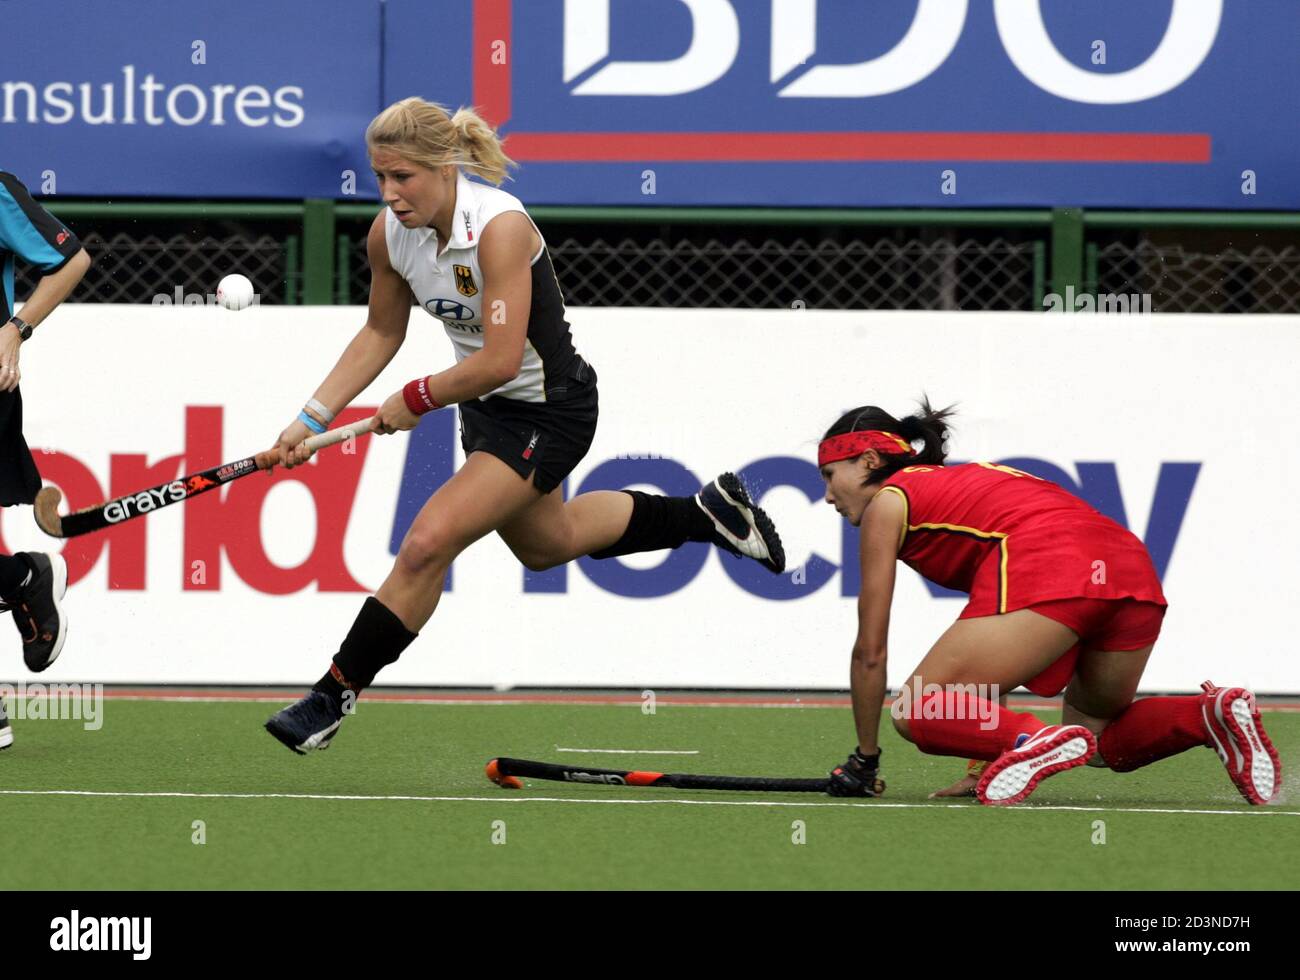 Kerstin Hoyer (L) of Germany hits the ball away as China's Mai Shaoyan  falls to the ground, during their women's field hockey Champions Trophy  match, played at the Jockey Club in the